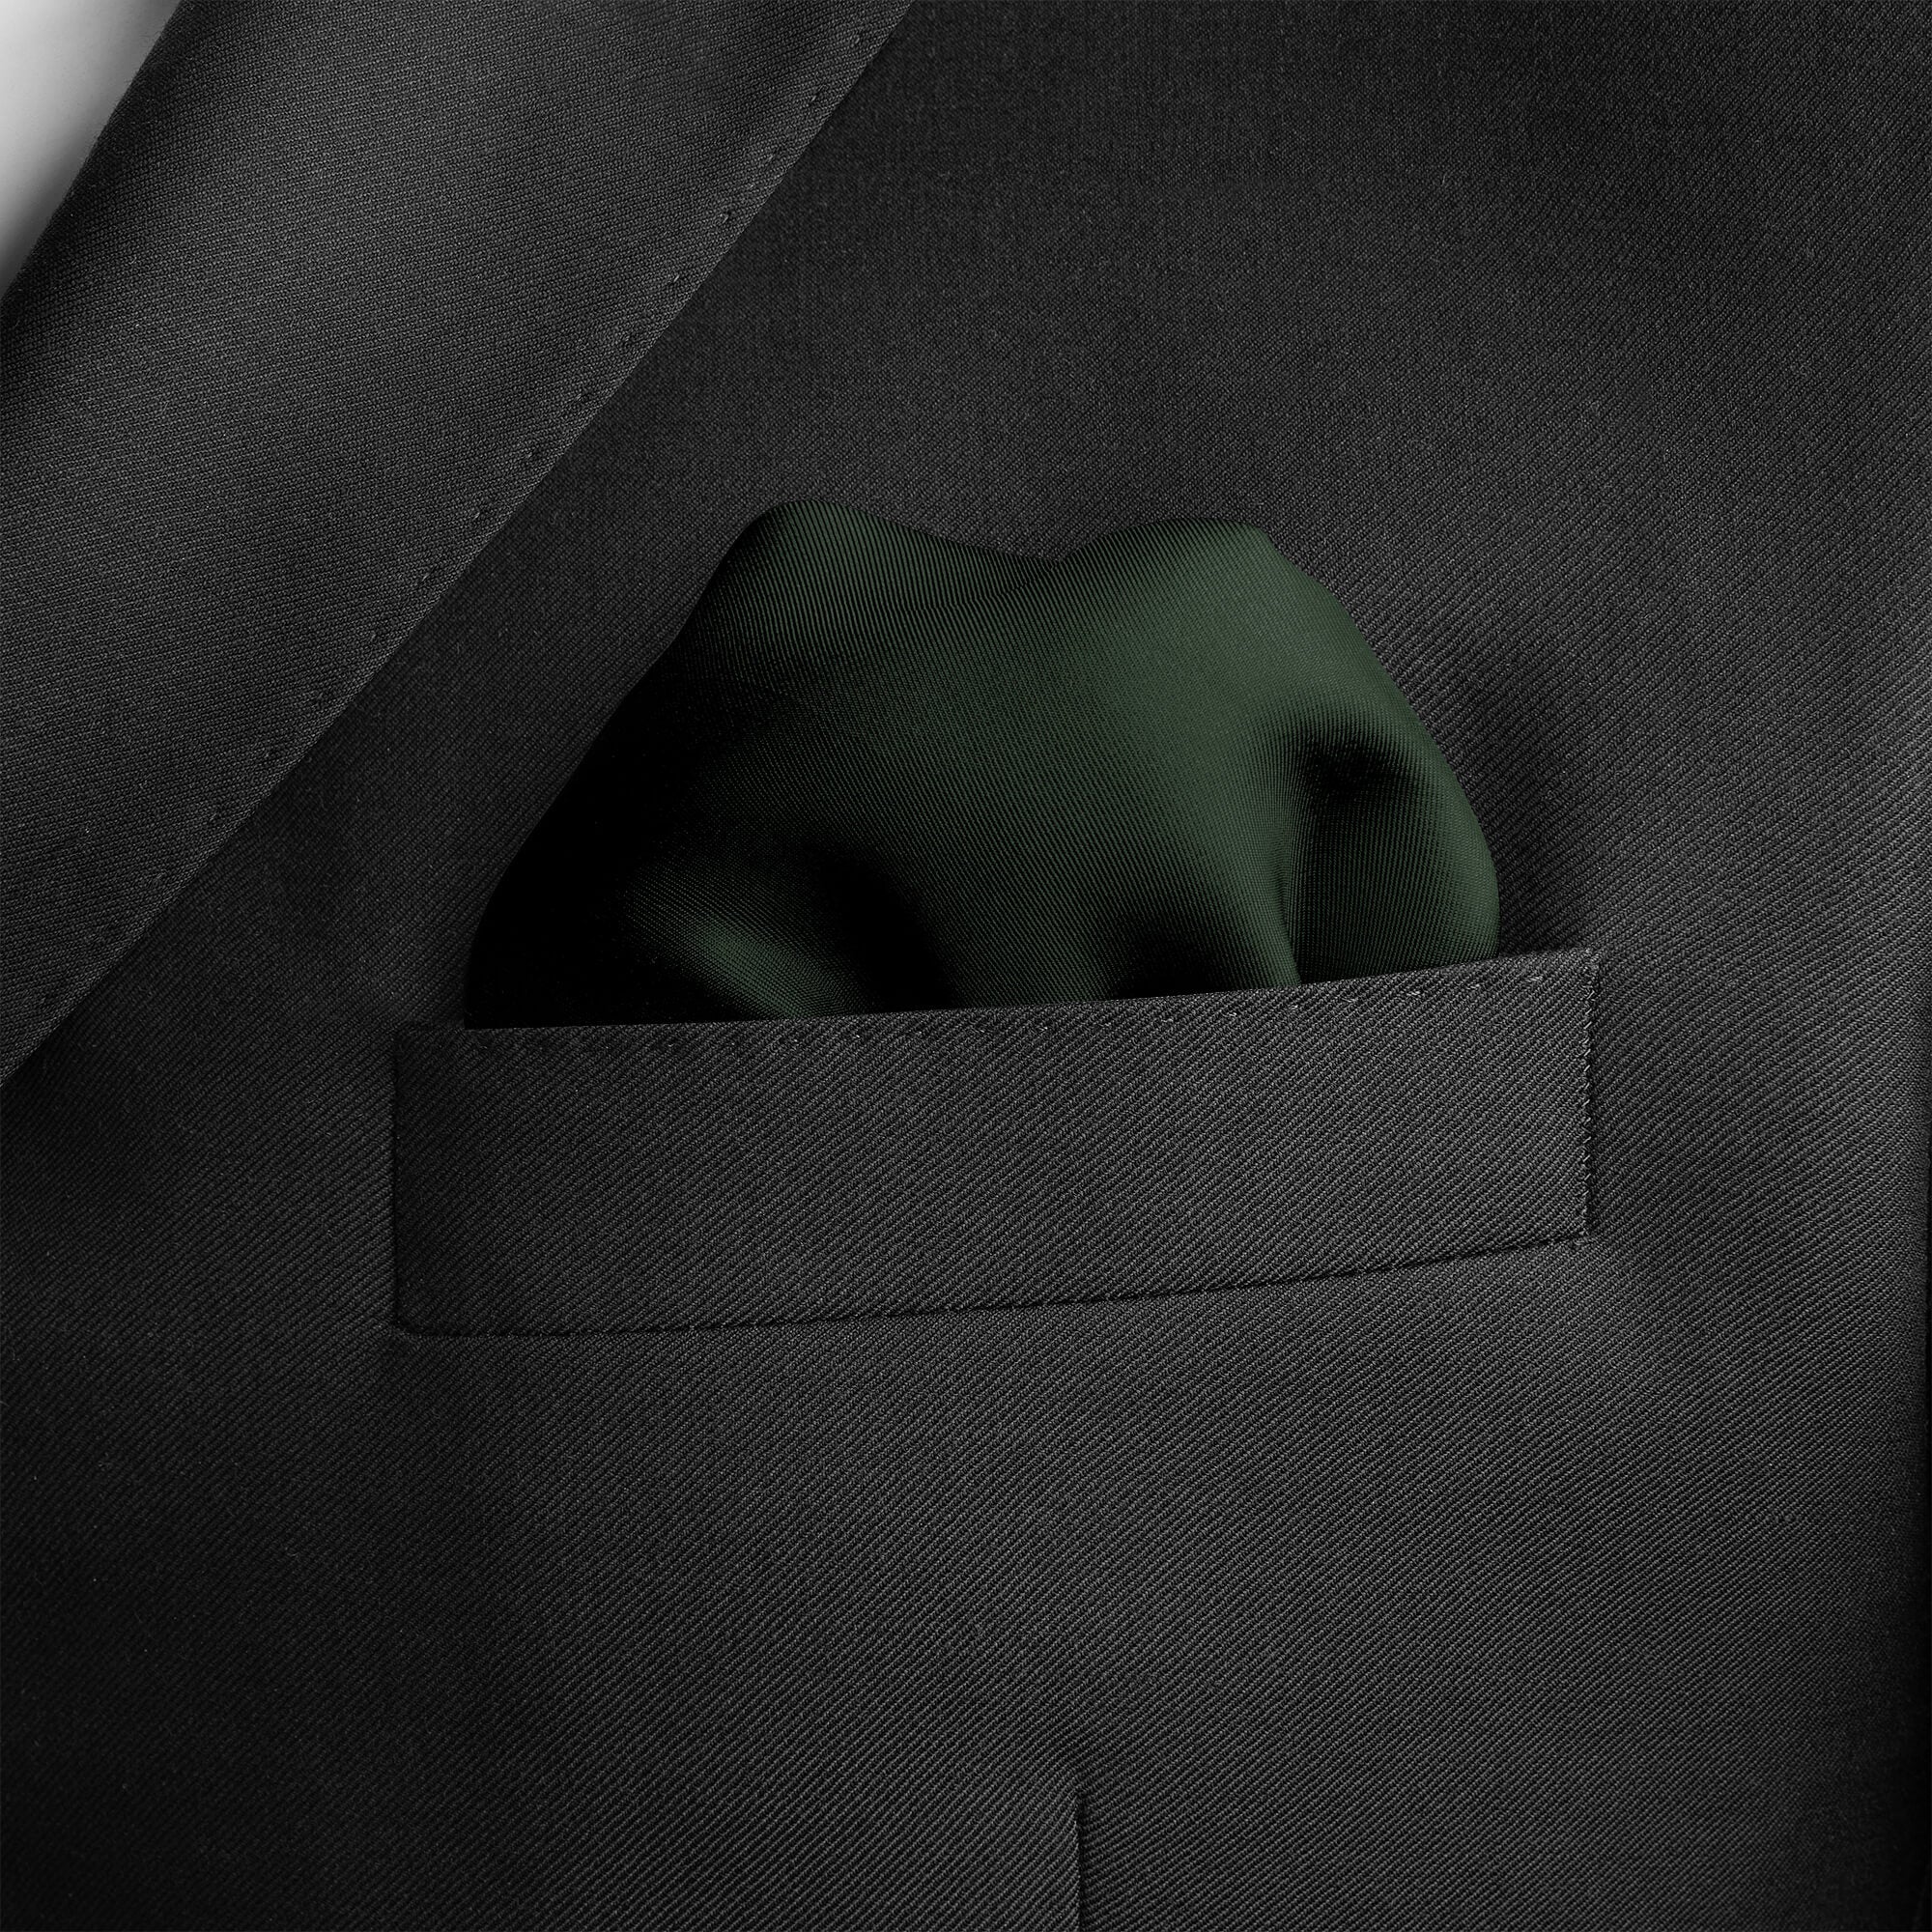 THE SOLID GREEN SILK POCKET SQUARE